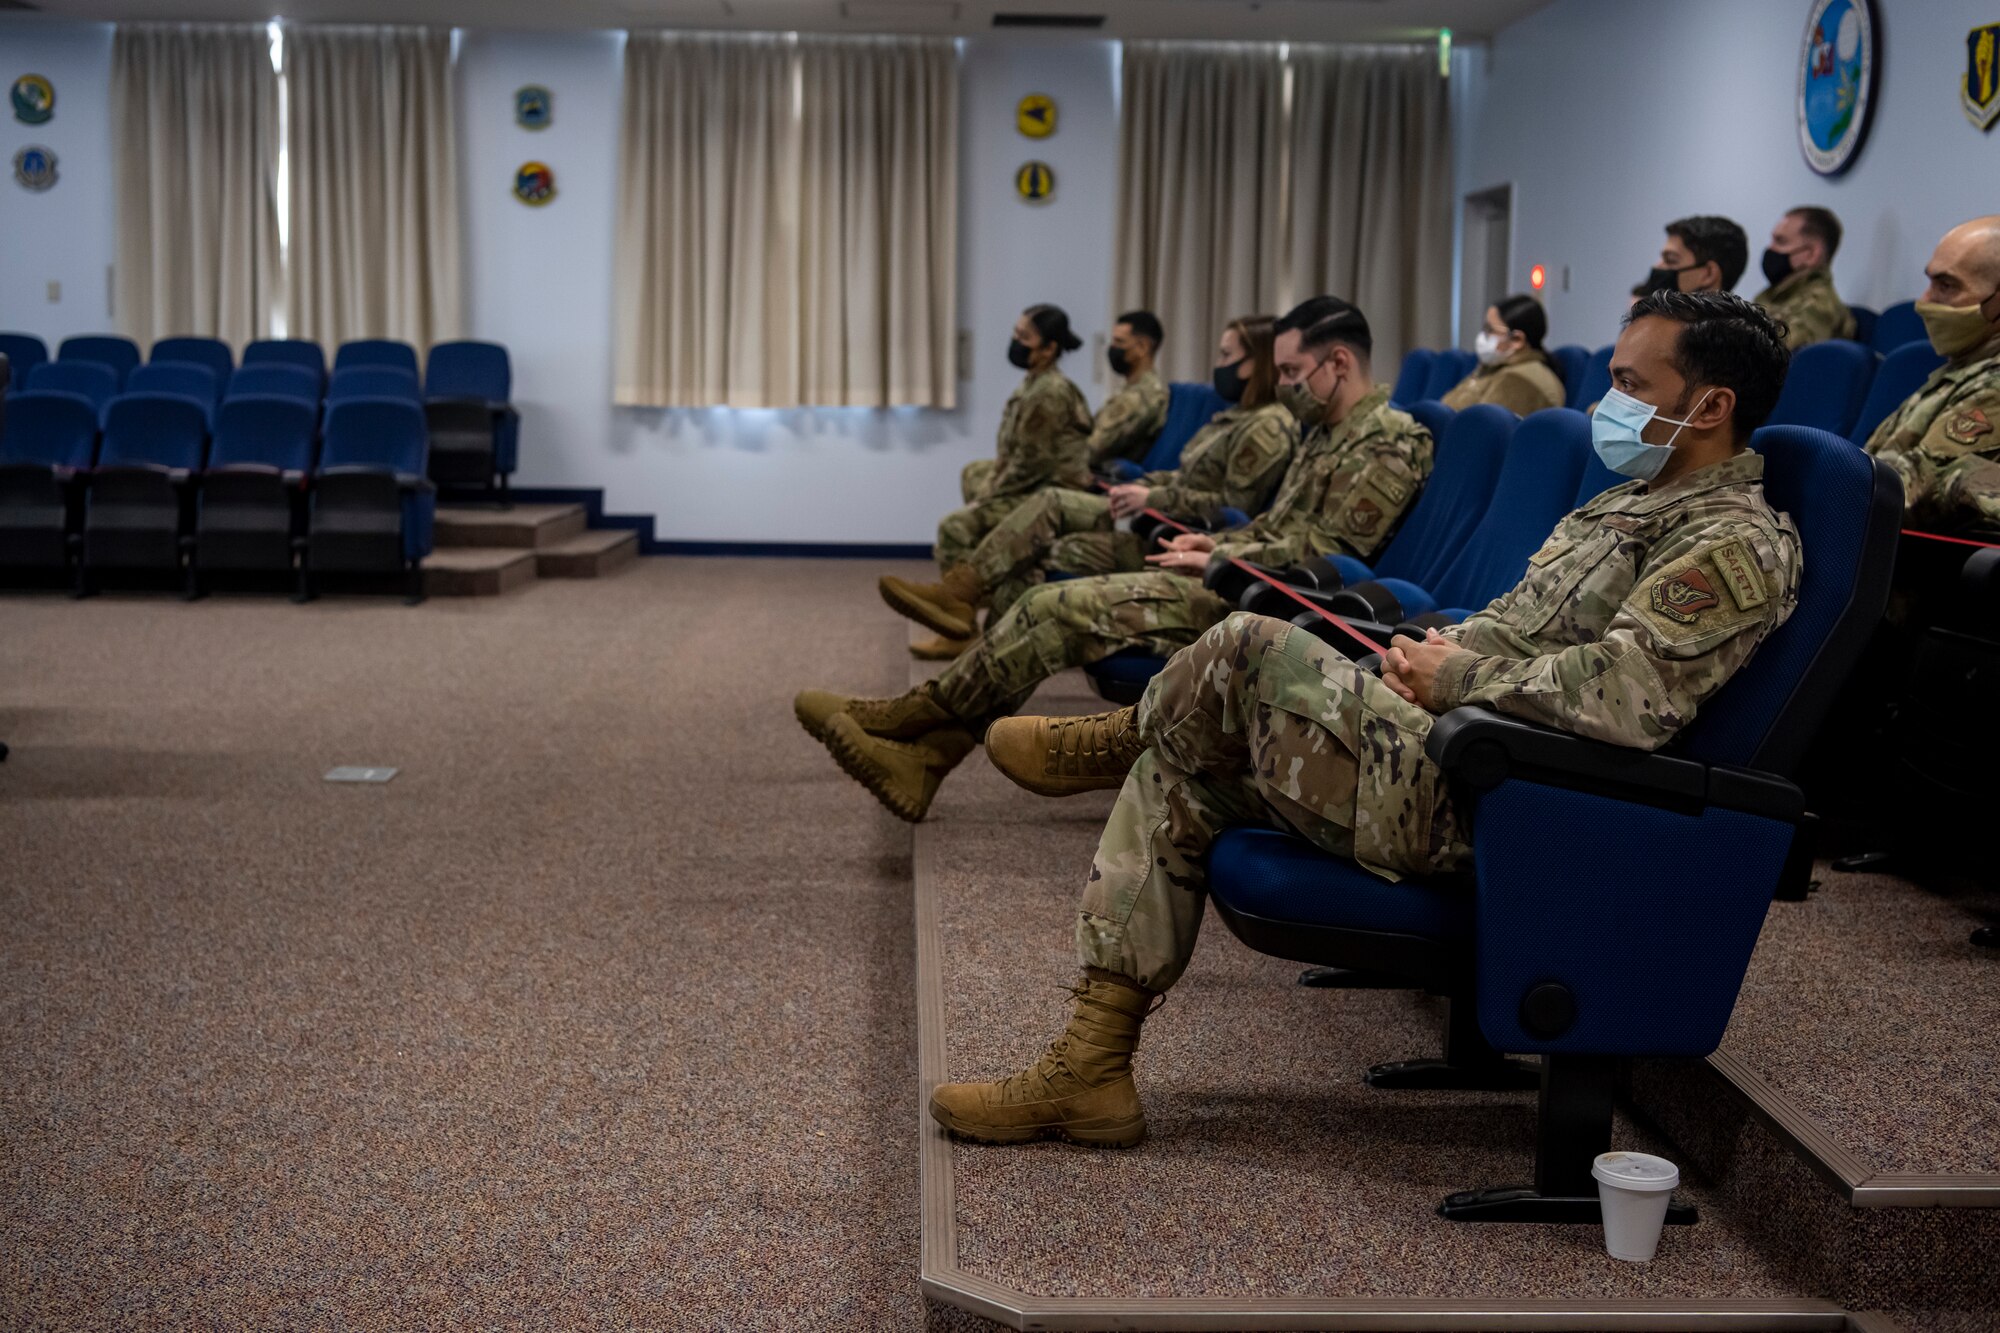 Airmen sitting in a conference room.